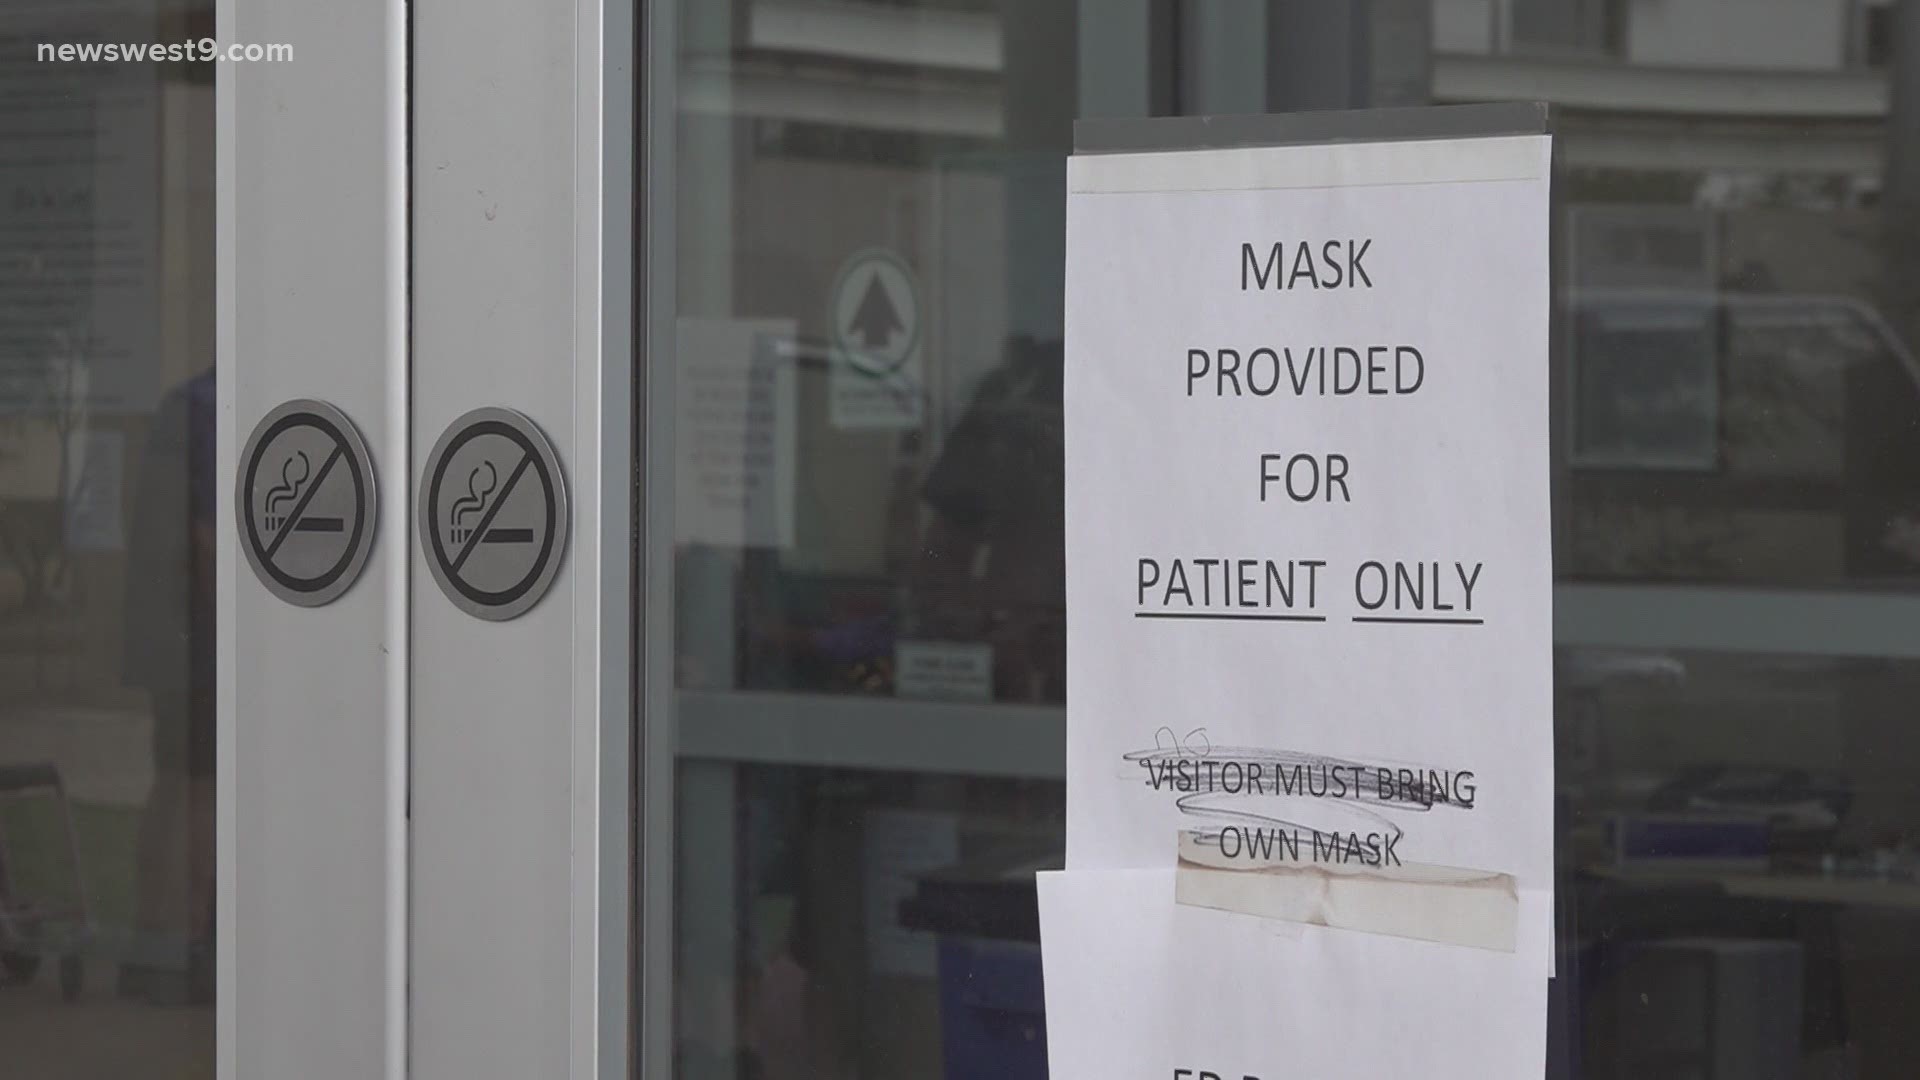 After hearing from both Midland and Odessa mayors on Tuesday, we reached out to Midland County officials to hear their stance on a mask mandate.